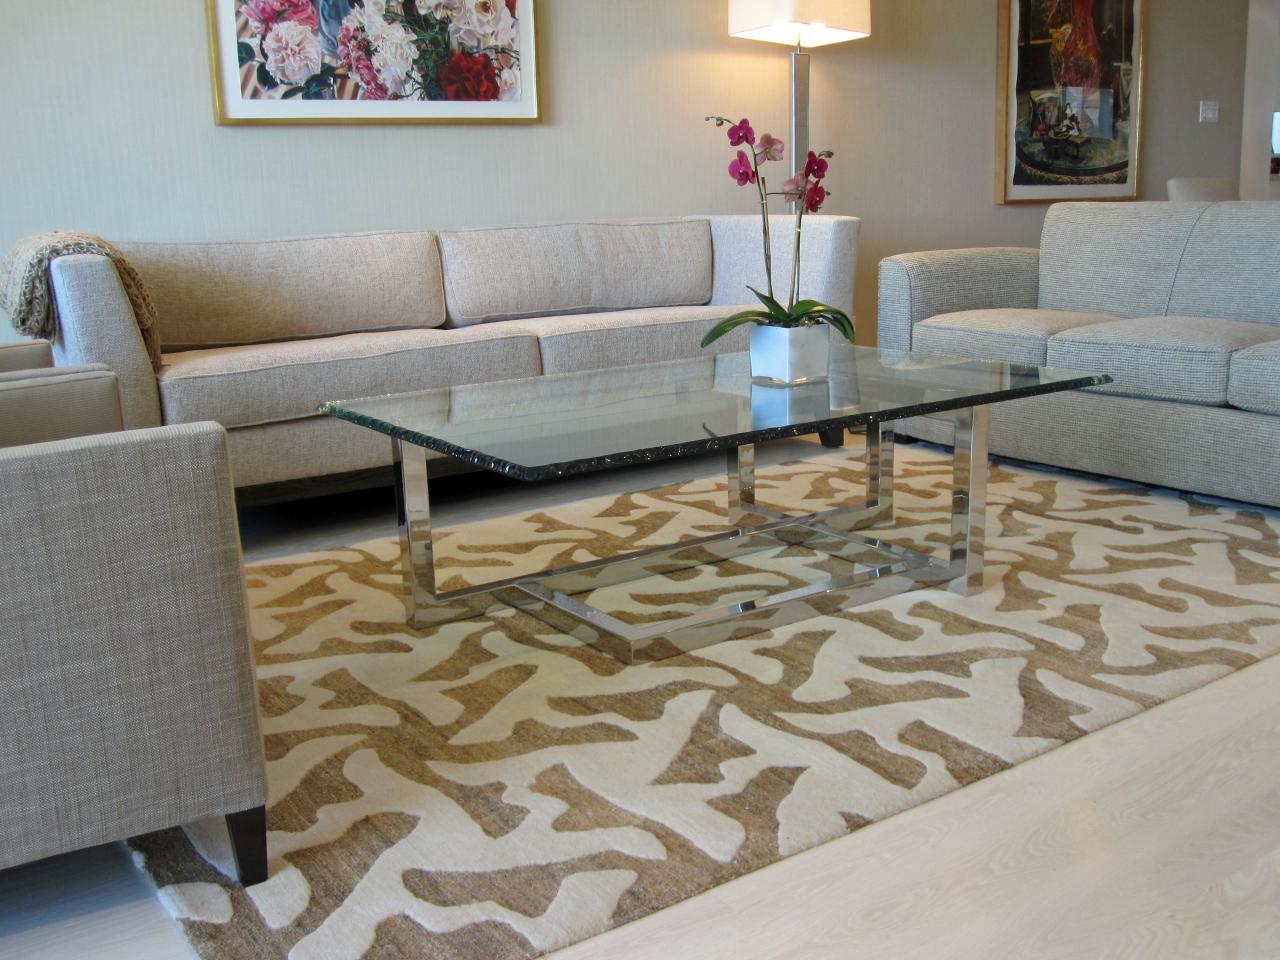 Choosing The Best Area Rug For Your, How To Choose A Rug For A Living Room